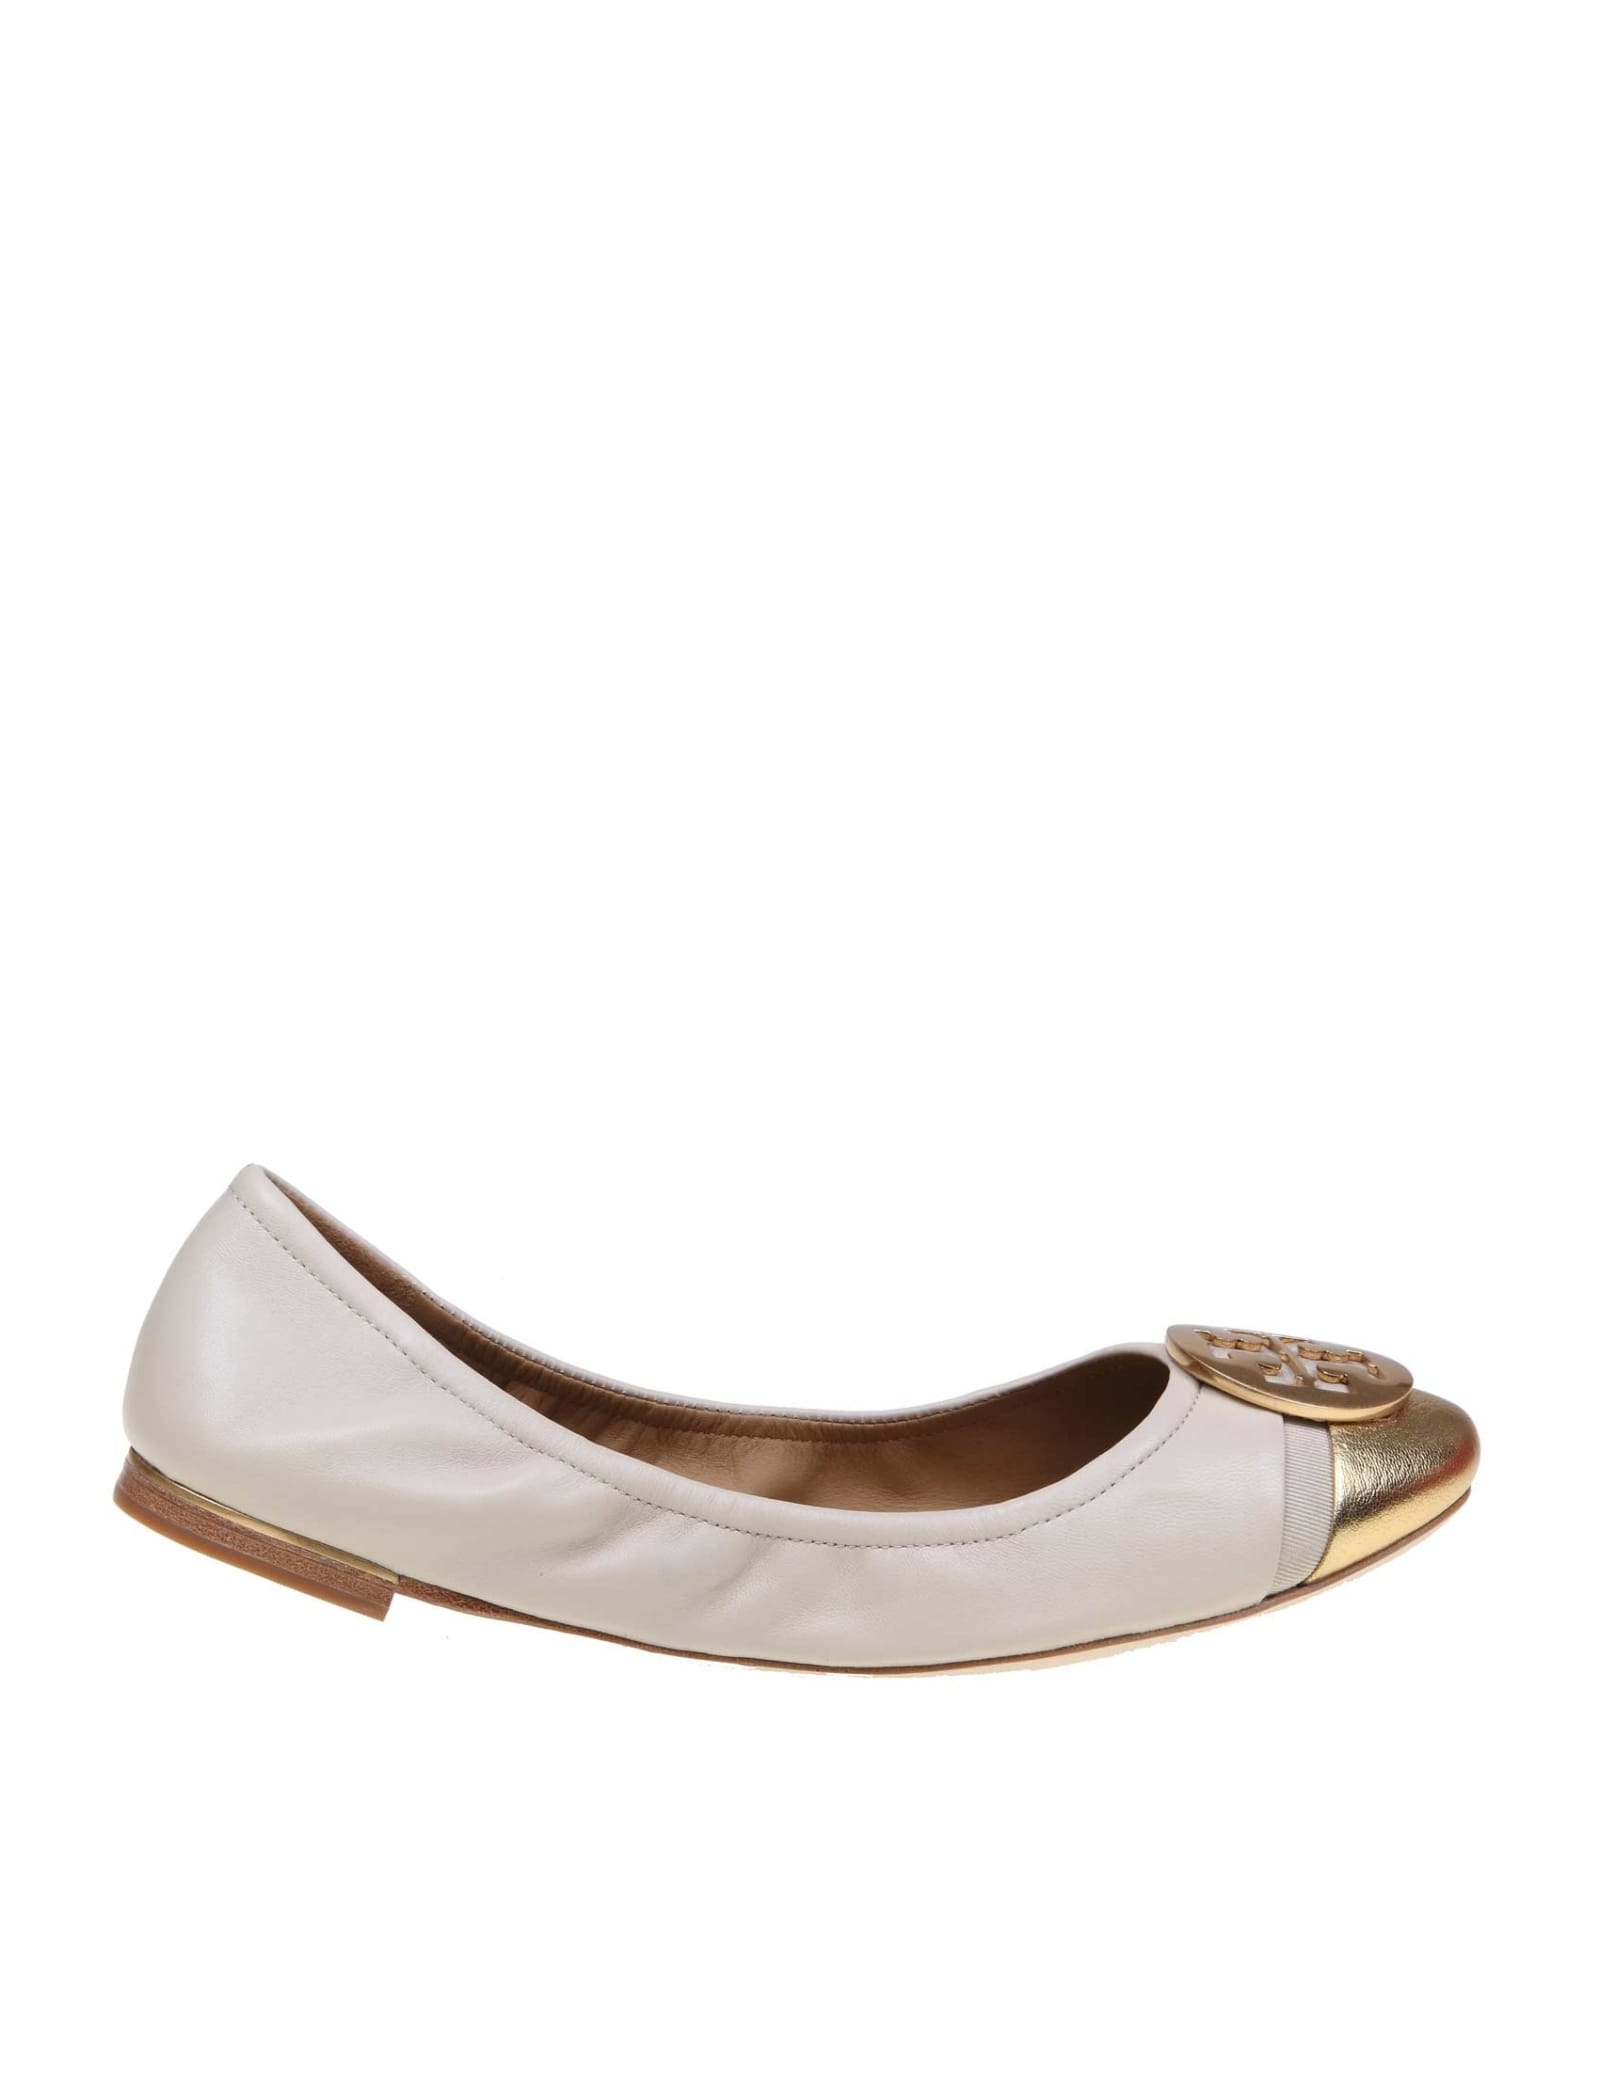 Tory Burch Minnie Cap-toe Ballerina Flat Leather Ballet Ivory Color / Gold